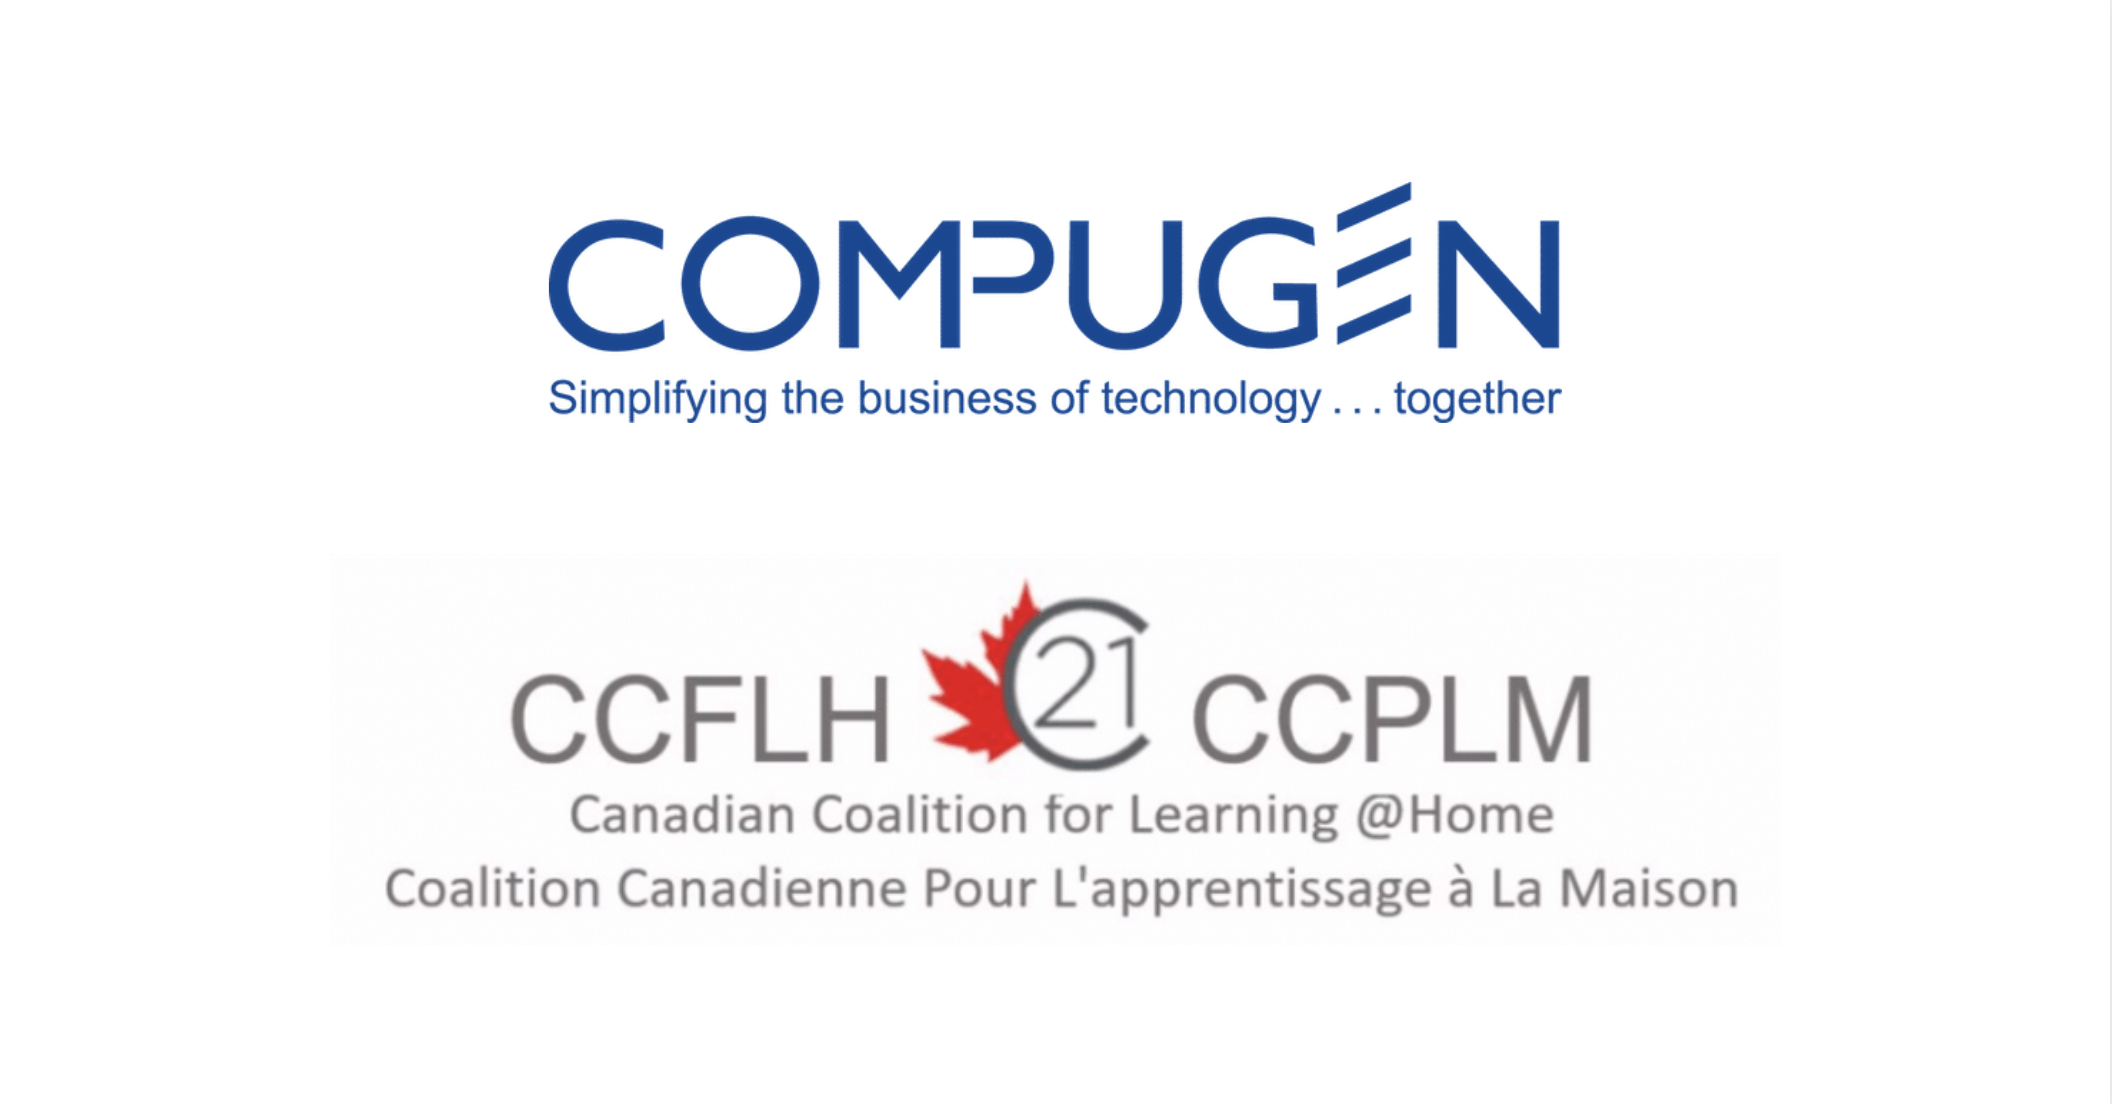 Compugen becomes a partner in the Canadian Coalition for Learning @ Home